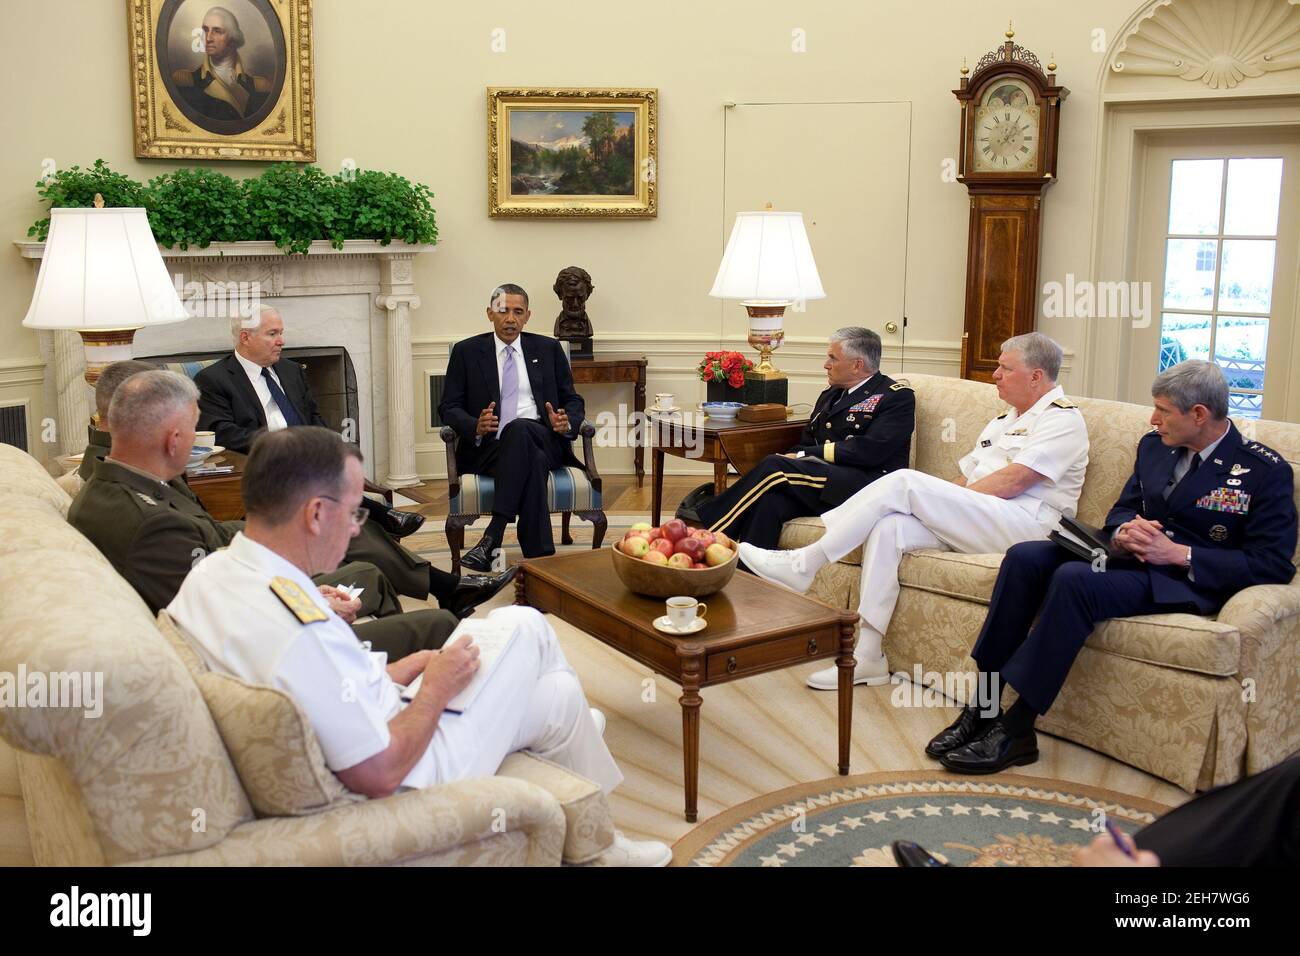 President Barack Obama meets with Defense Secretary Robert Gates and the Joint Chiefs of Staff in the Oval Office, June 21, 2010. Pictured, clockwise from the President, are Army Chief of Staff Gen. George W. Casey, Jr., Chief of Naval Operations Admiral Gary Roughhead, Chief of Staff of the Air Force Gen. Norton S. Schwartz, Chairman of the Joint Chiefs of Staff Admiral Michael Mullen, Commandant of the Marine Corps Gen. James T. Conway, and Gen. James Cartwright, vice chairman of the Joint Chiefs of Staff. Stock Photo